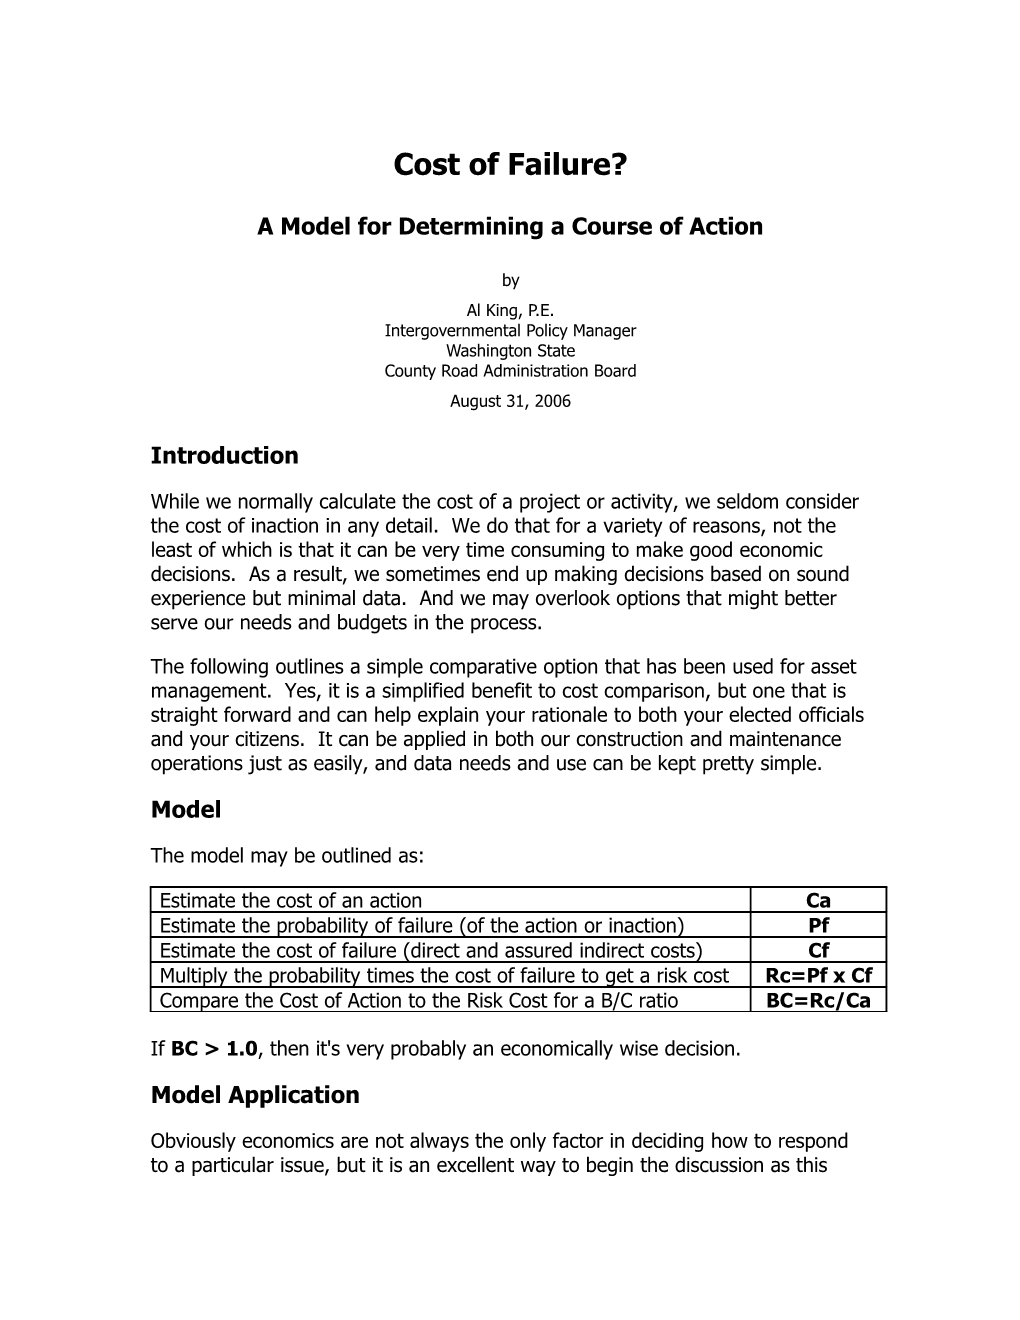 Cost of Failure